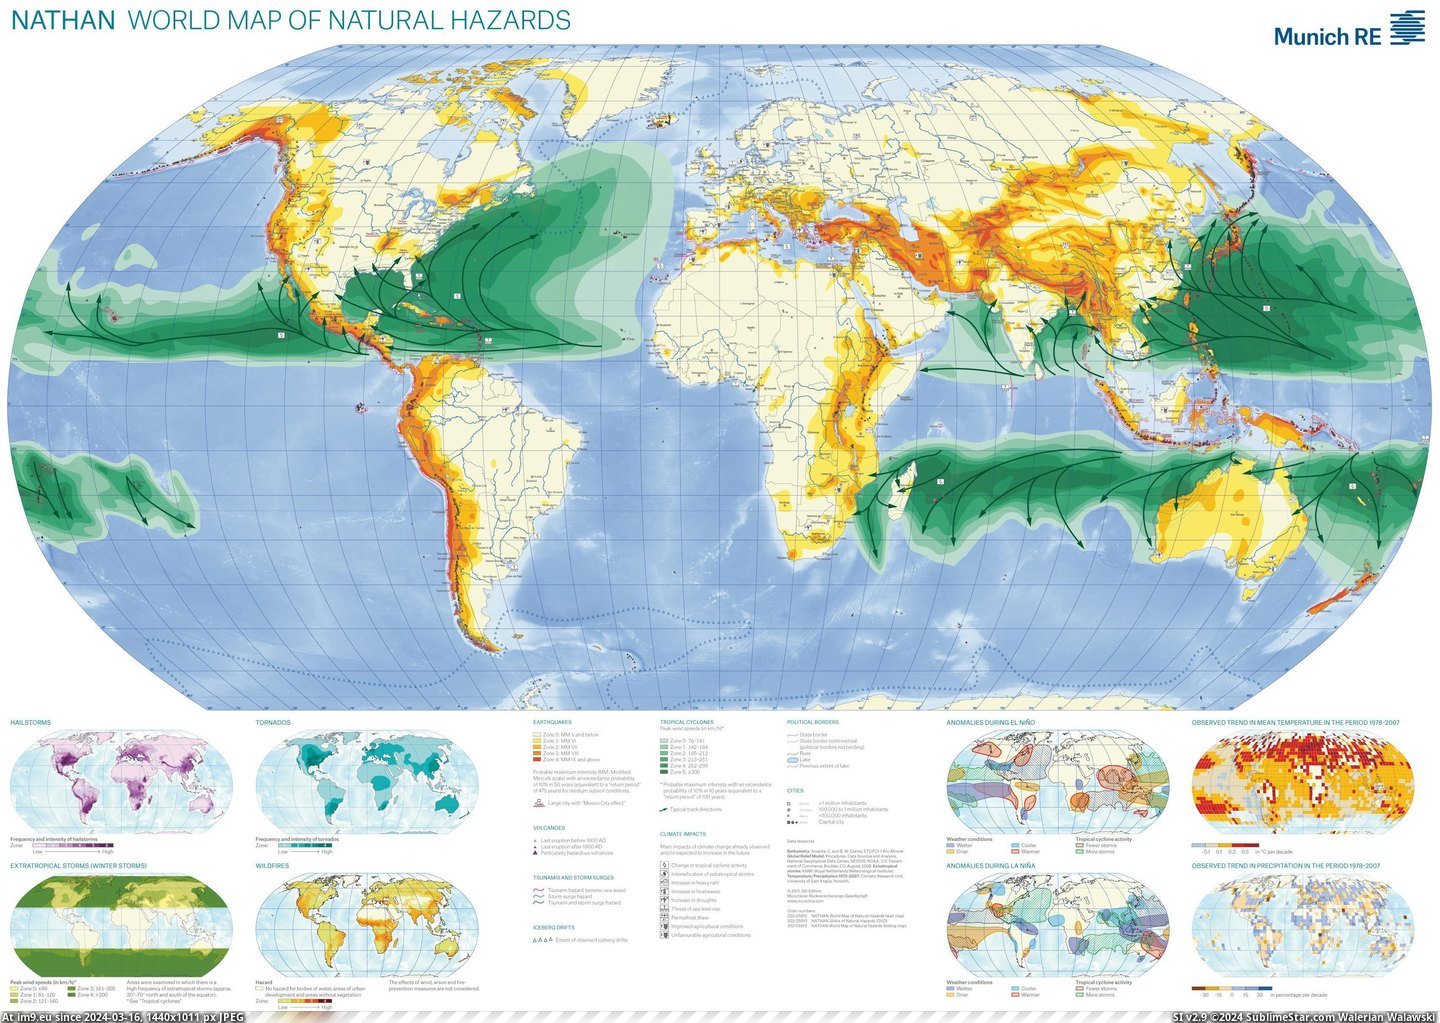 #World #Map #Natural #Cyclones #Tsunamis #Volcanoes #Earthquakes #Hazards [Dataisbeautiful] World Map of Natural Hazards (earthquakes, cyclones, volcanoes, tsunamis and more ... ) [X-Post MapPorn] Pic. (Изображение из альбом My r/DATAISBEAUTIFUL favs))